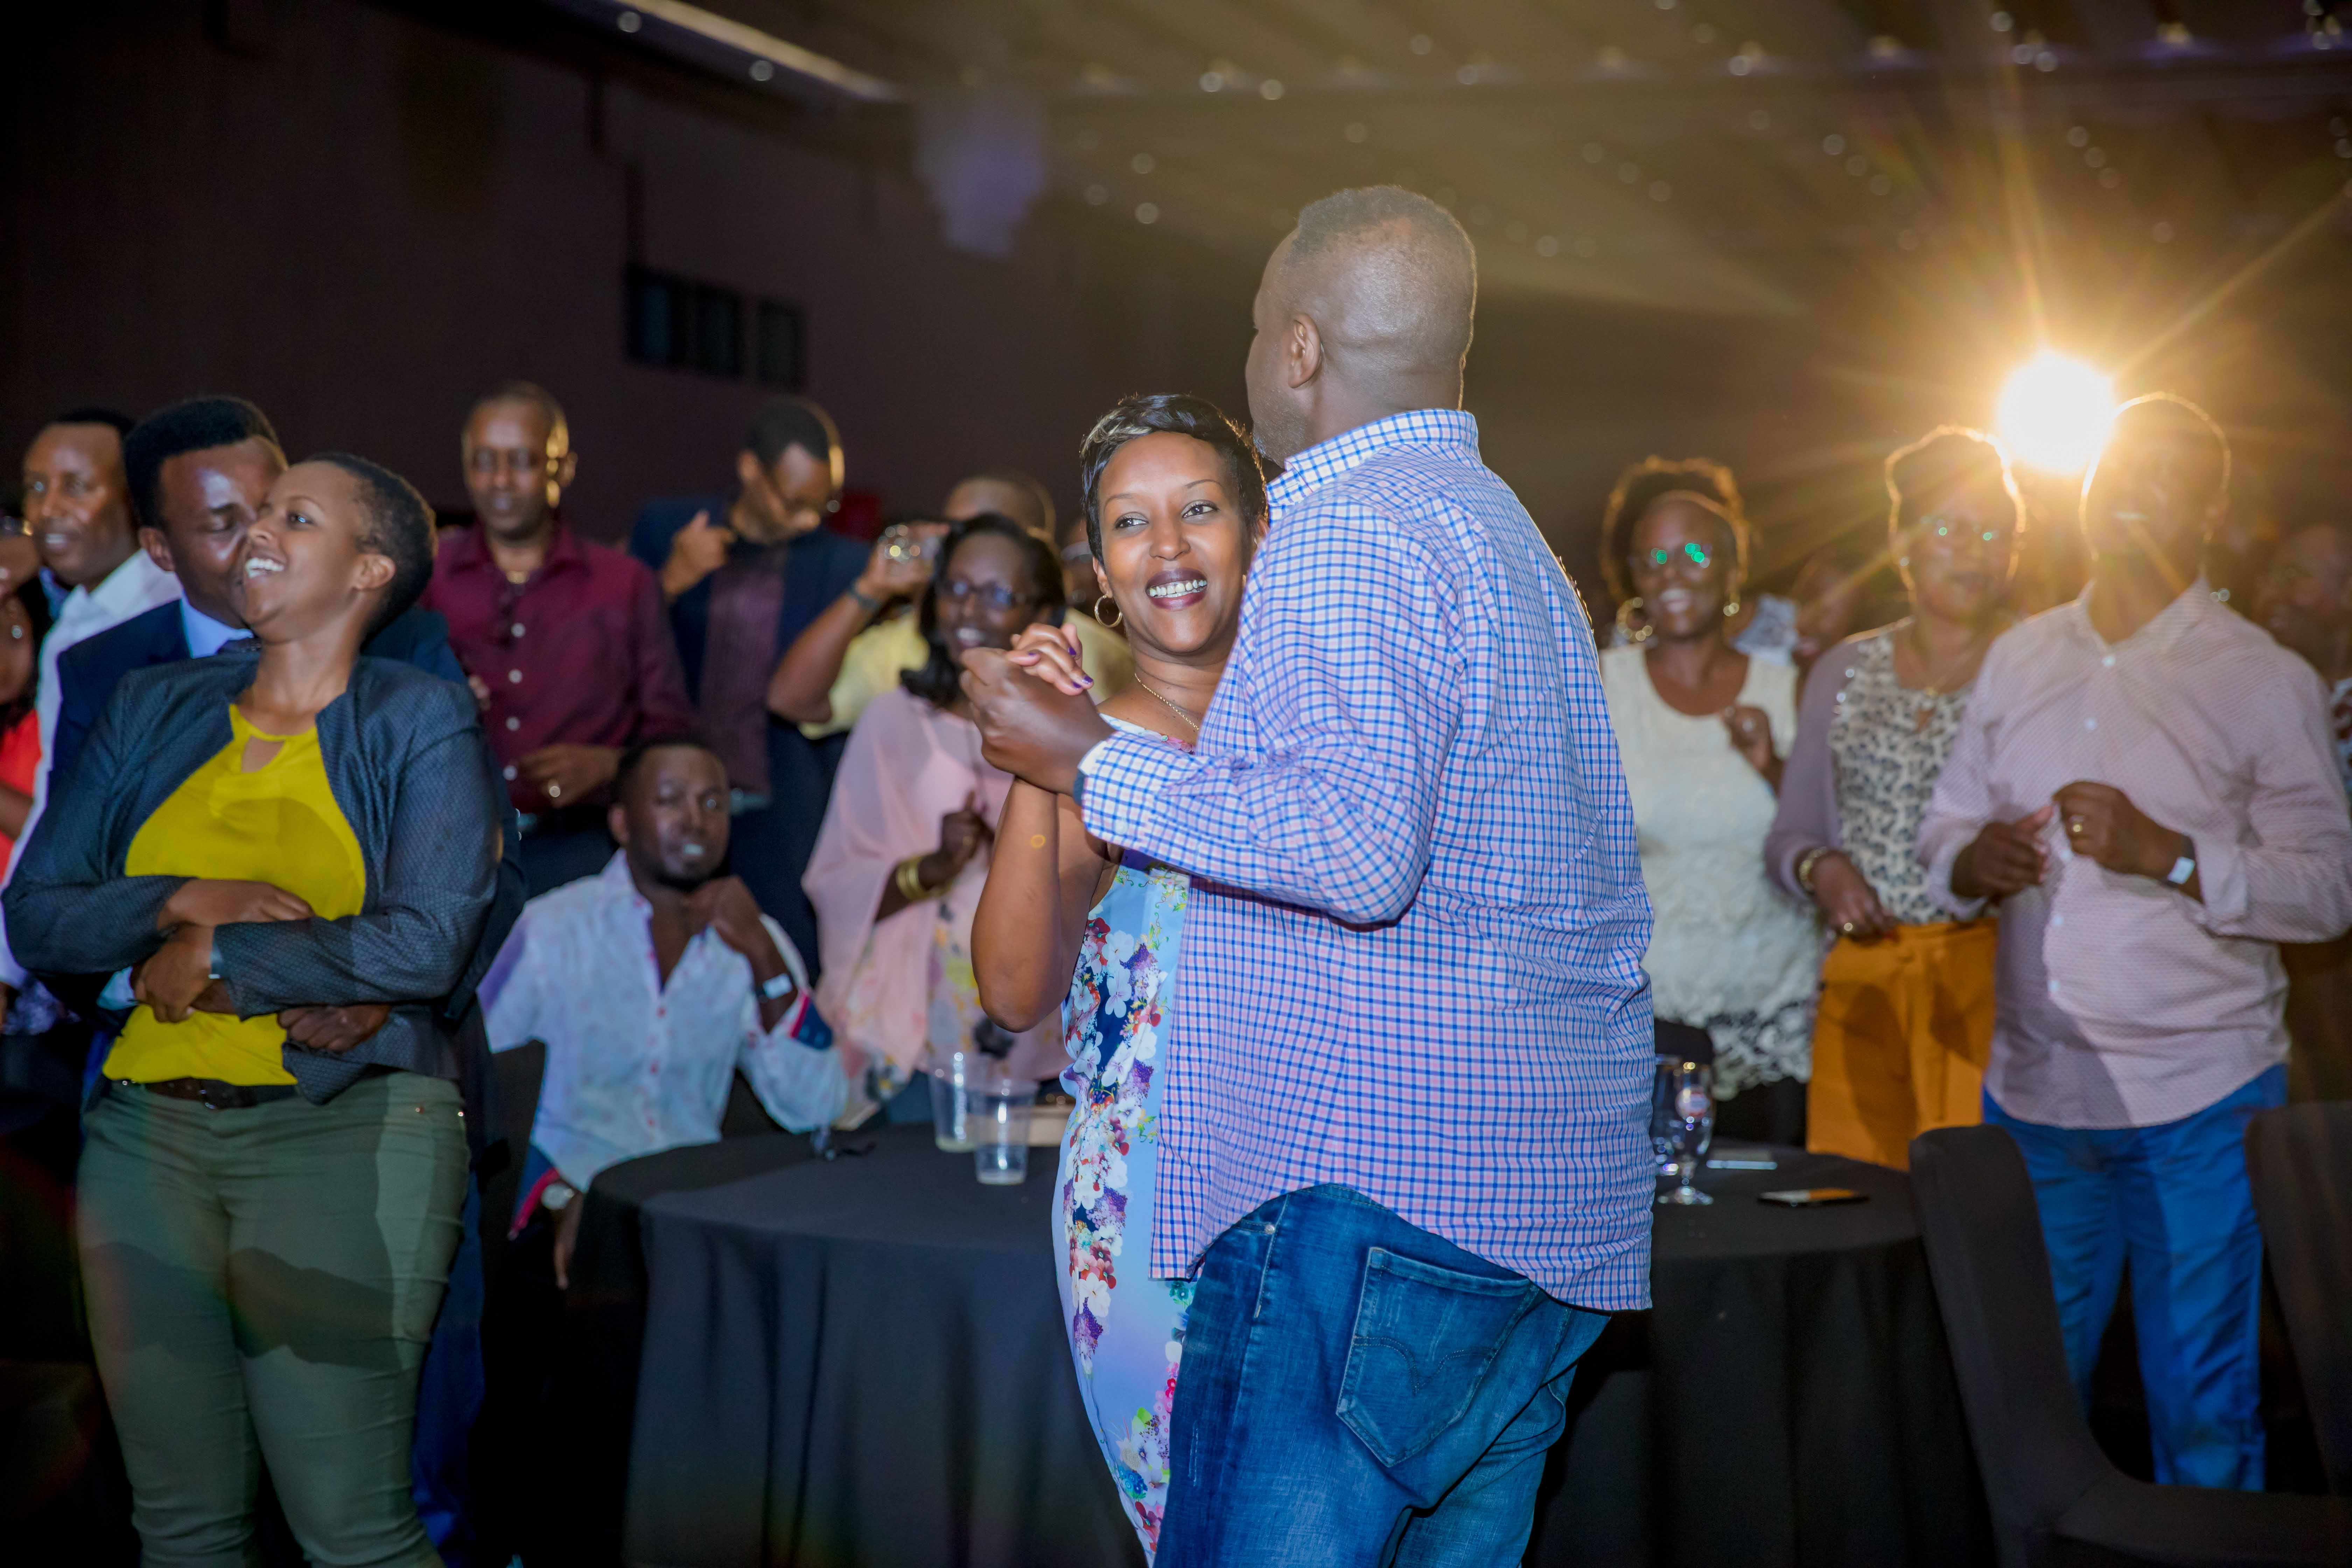 It was a love affair at the Kassav' Live on Valentine's Day.